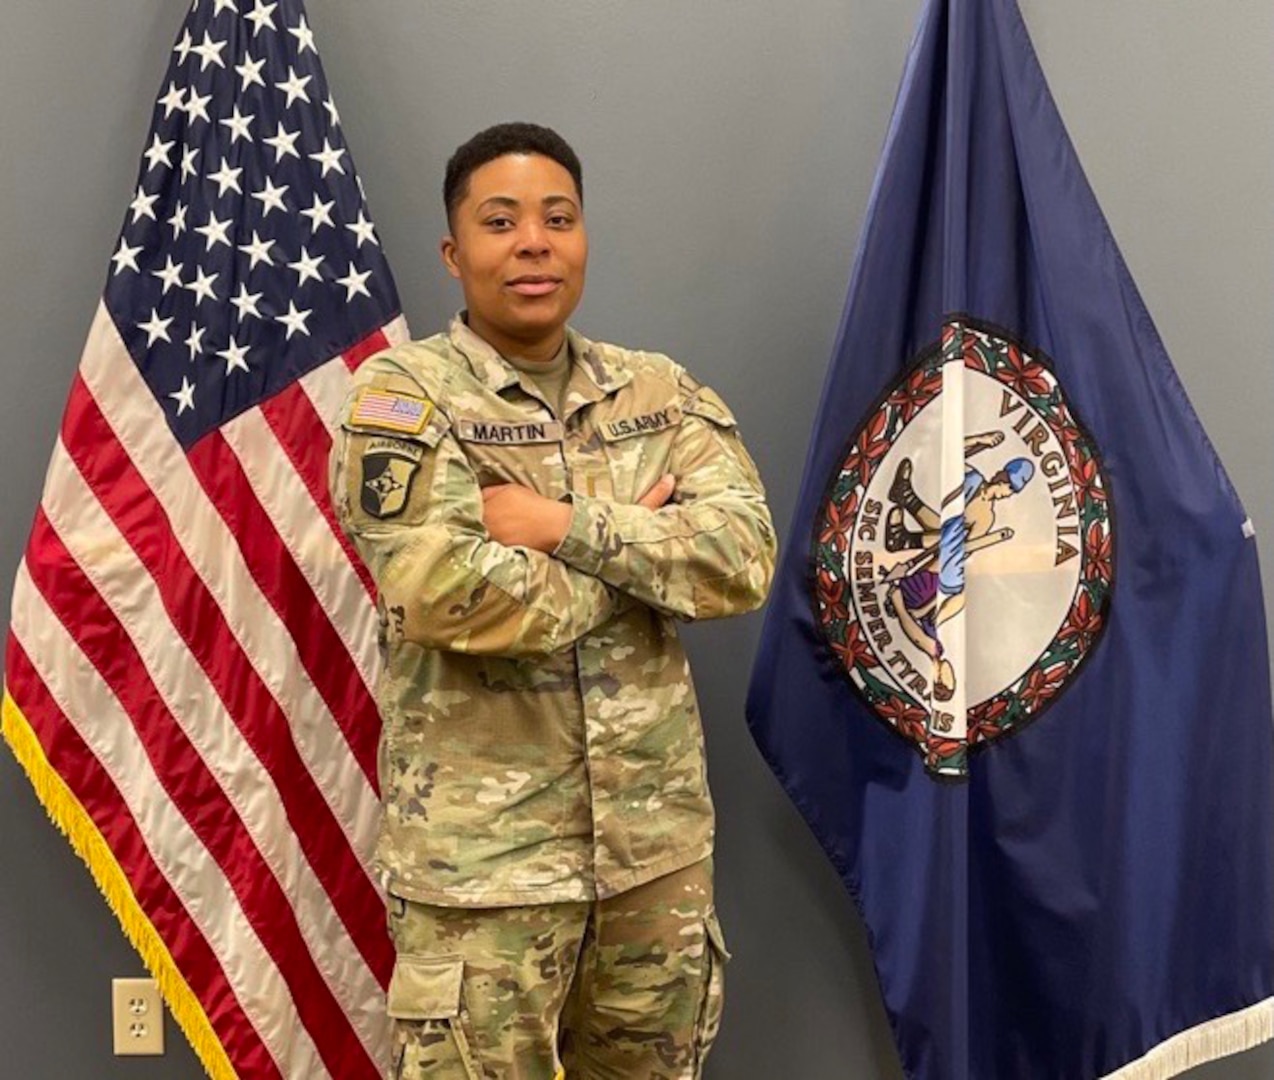 Over nearly a decade and a half serving in the Virginia Army National Guard, 2nd Lt. Elizabeth Martin gained four military occupational specialties as an enlisted Soldier before commissioning as a field artillery officer.